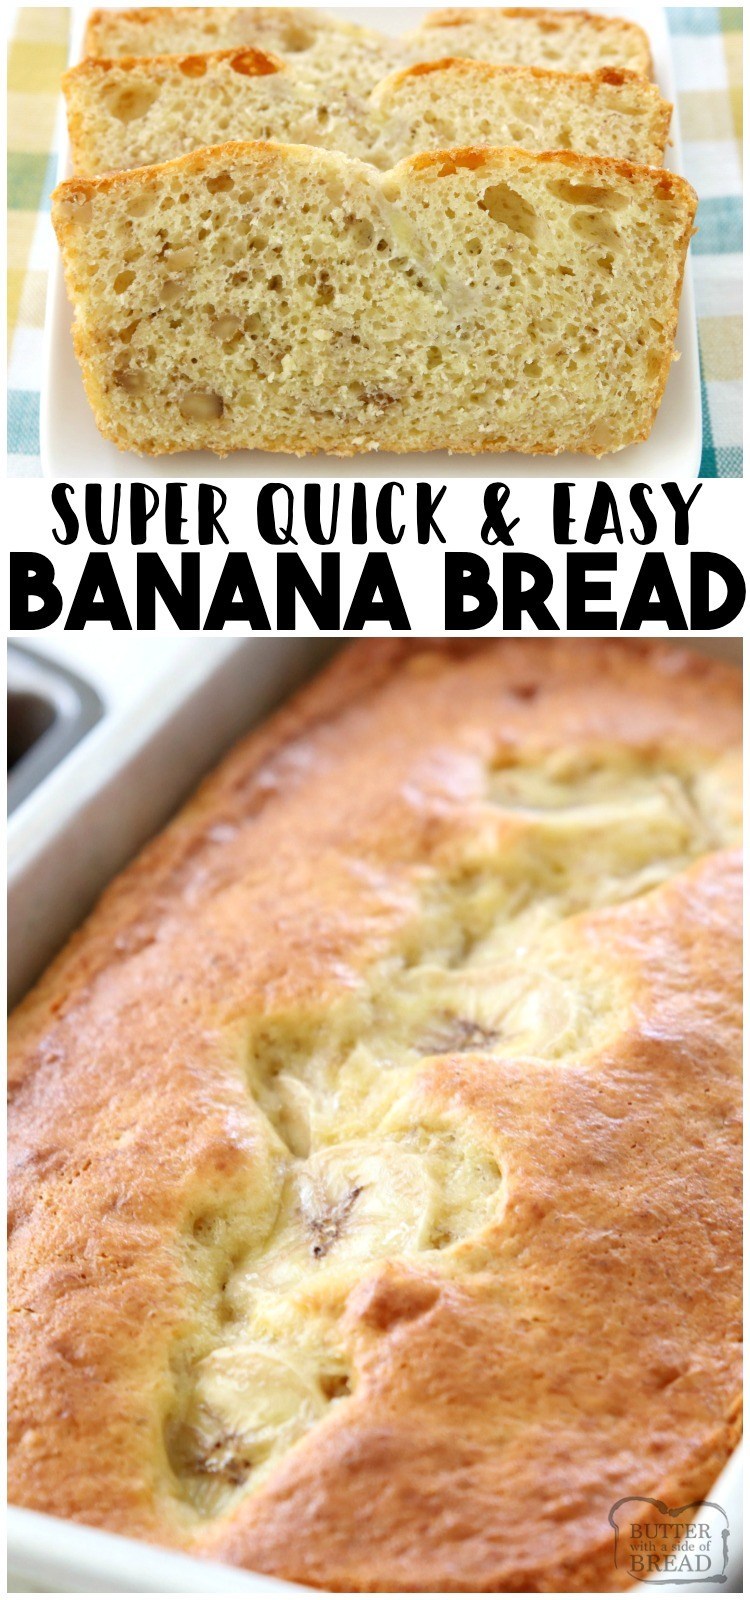 Easy Banana Bread is the simplest homemade banana bread recipe ever! Made with ripe bananas, a cake mix & 2 other simple ingredients. #banana #bread #quickbread #baking #recipe from BUTTER WITH A SIDE OF BREAD